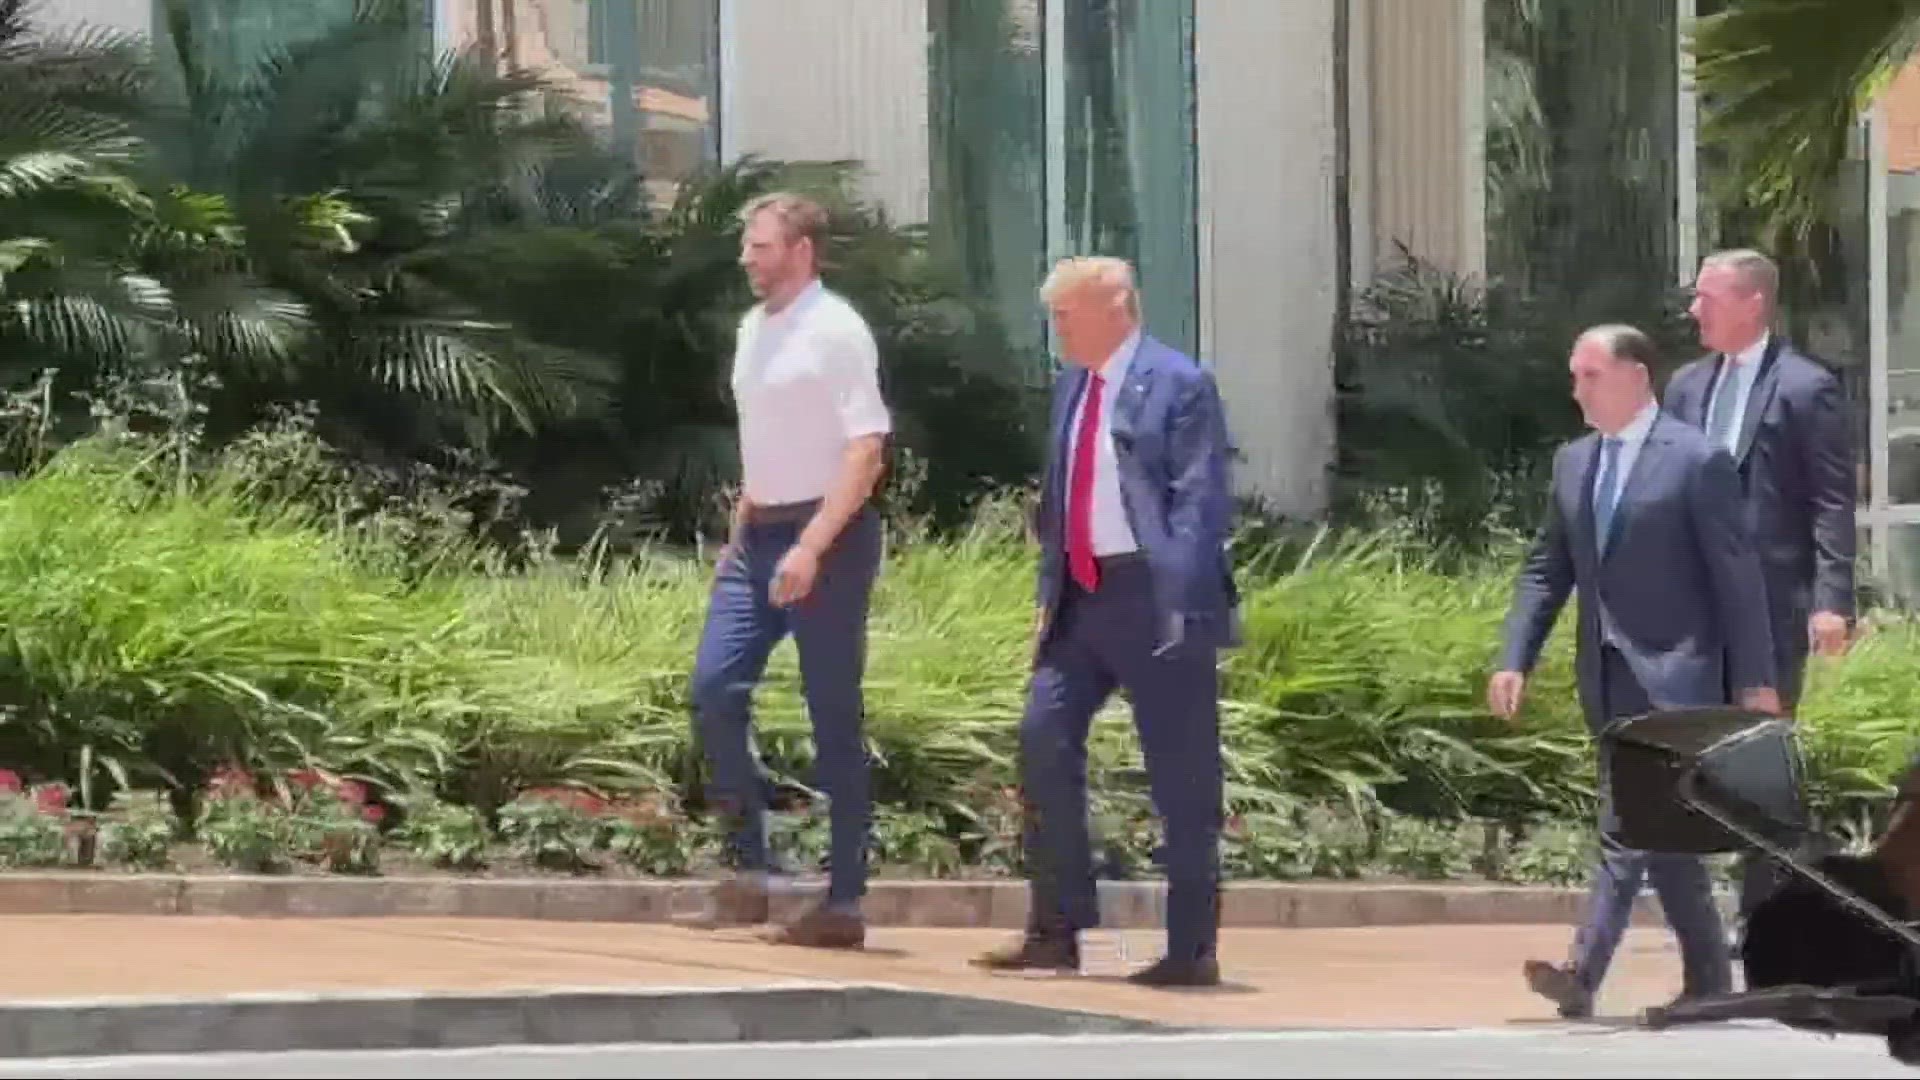 Trump arrived at the Miami Court this afternoon and pled not guilty on the 37 federal counts involving his handling of classified documents.